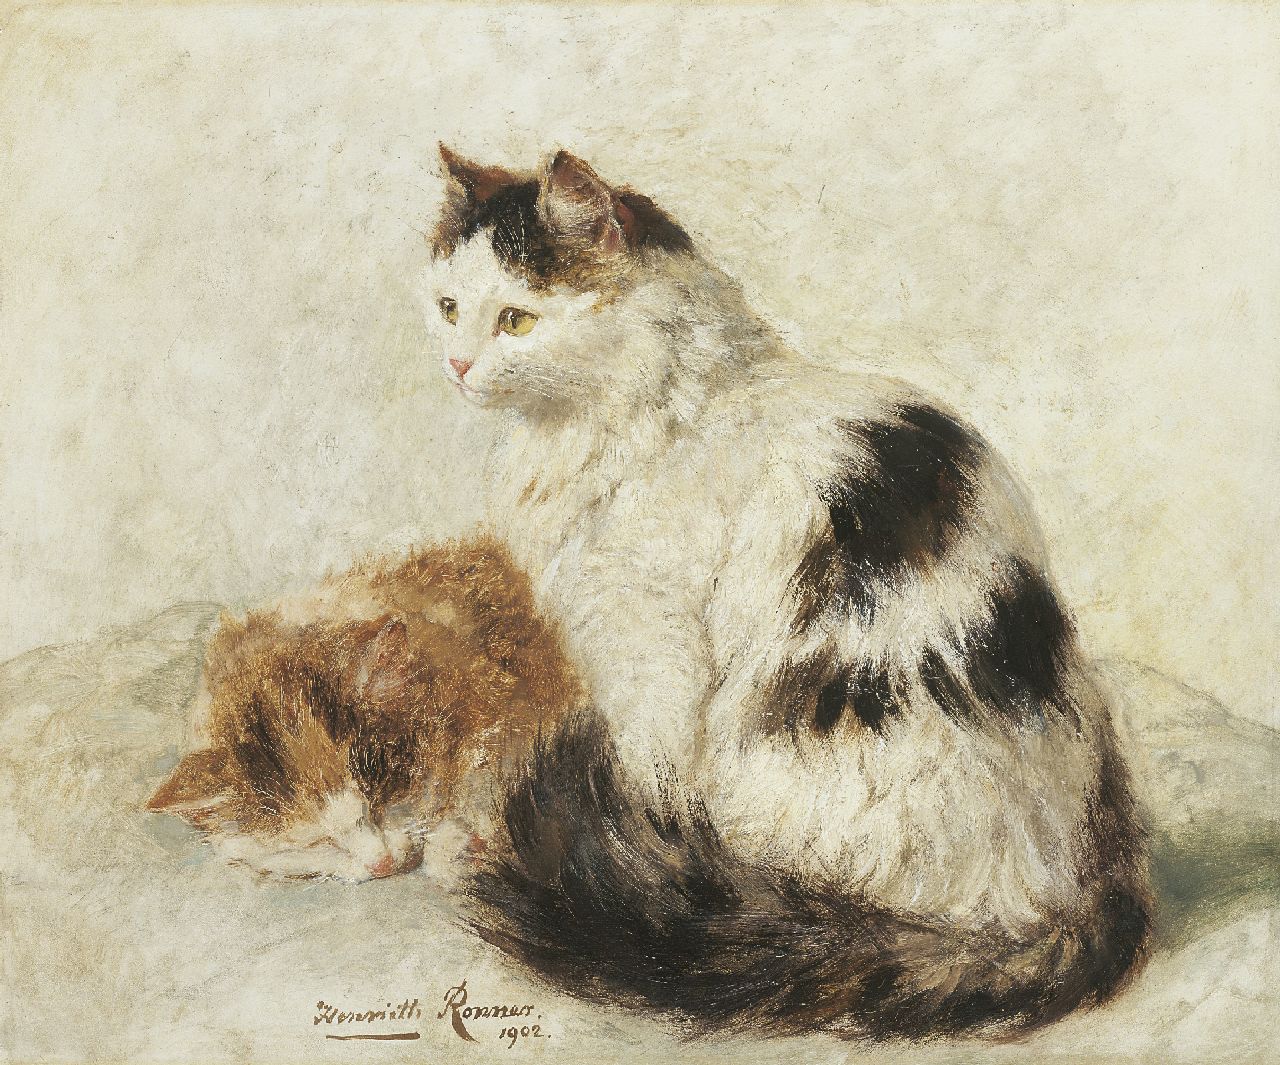 Ronner-Knip H.  | Henriette Ronner-Knip, Two cats, Öl auf Holz 36,9 x 45,0 cm, signed l.c. und painted 1902